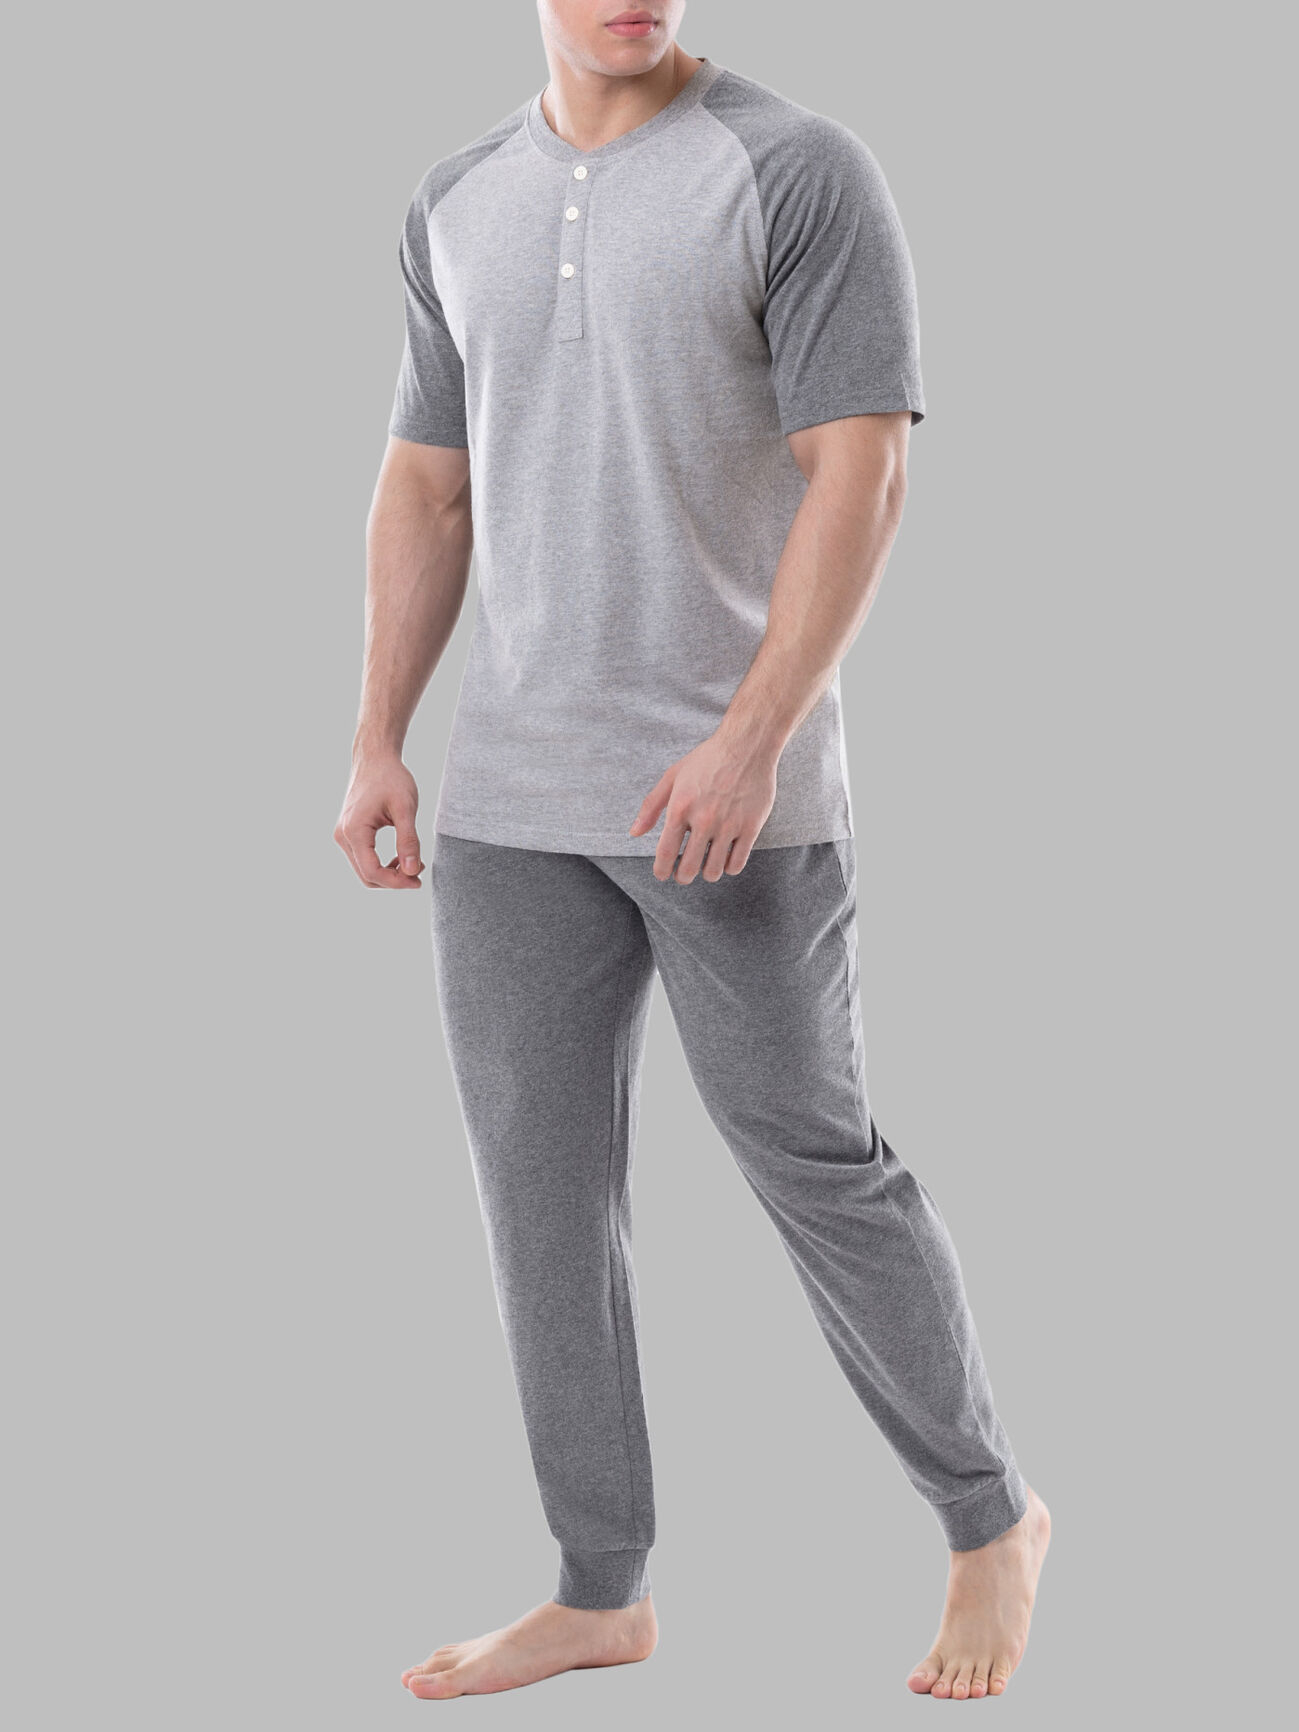 Fruit of the Loom Men's Jersey Short Sleeve Henley Top and Jogger